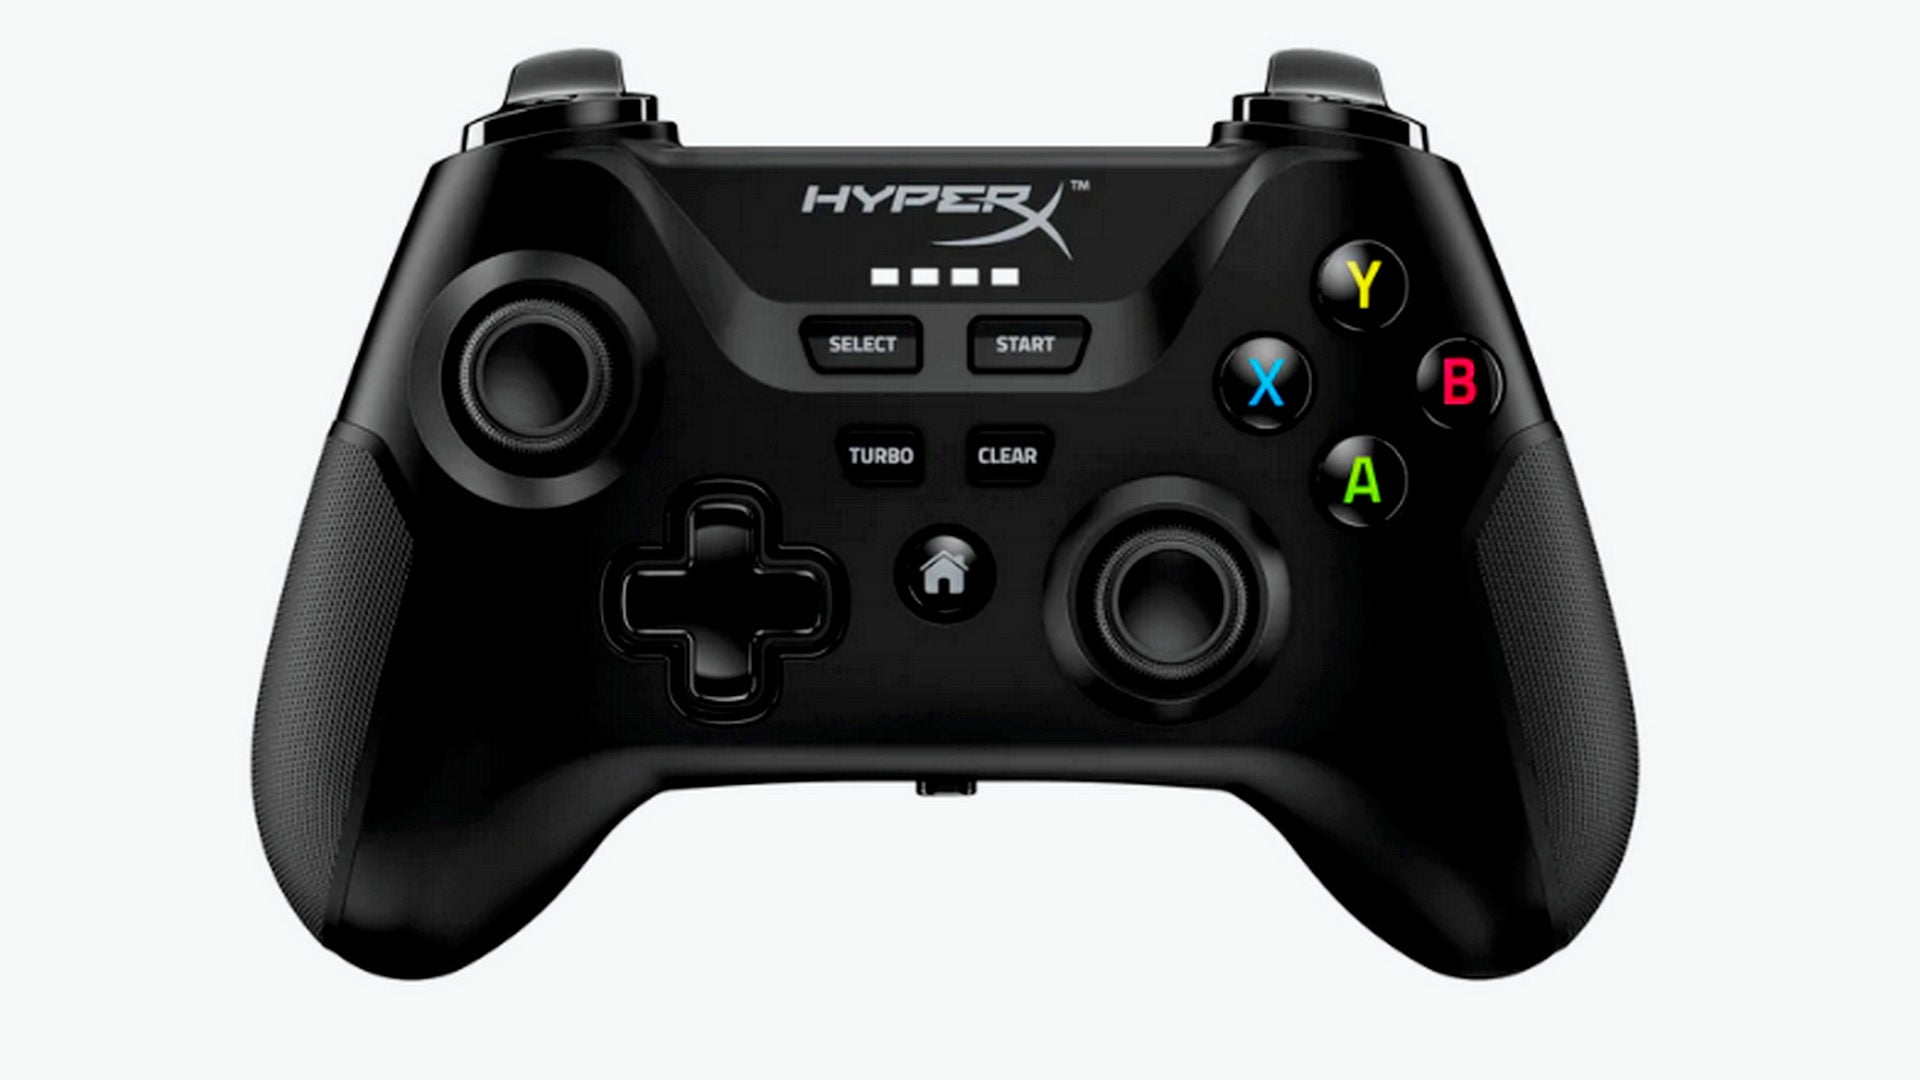 HyperX’s new Clutch Wireless Game Controller is now available and lets you play longer